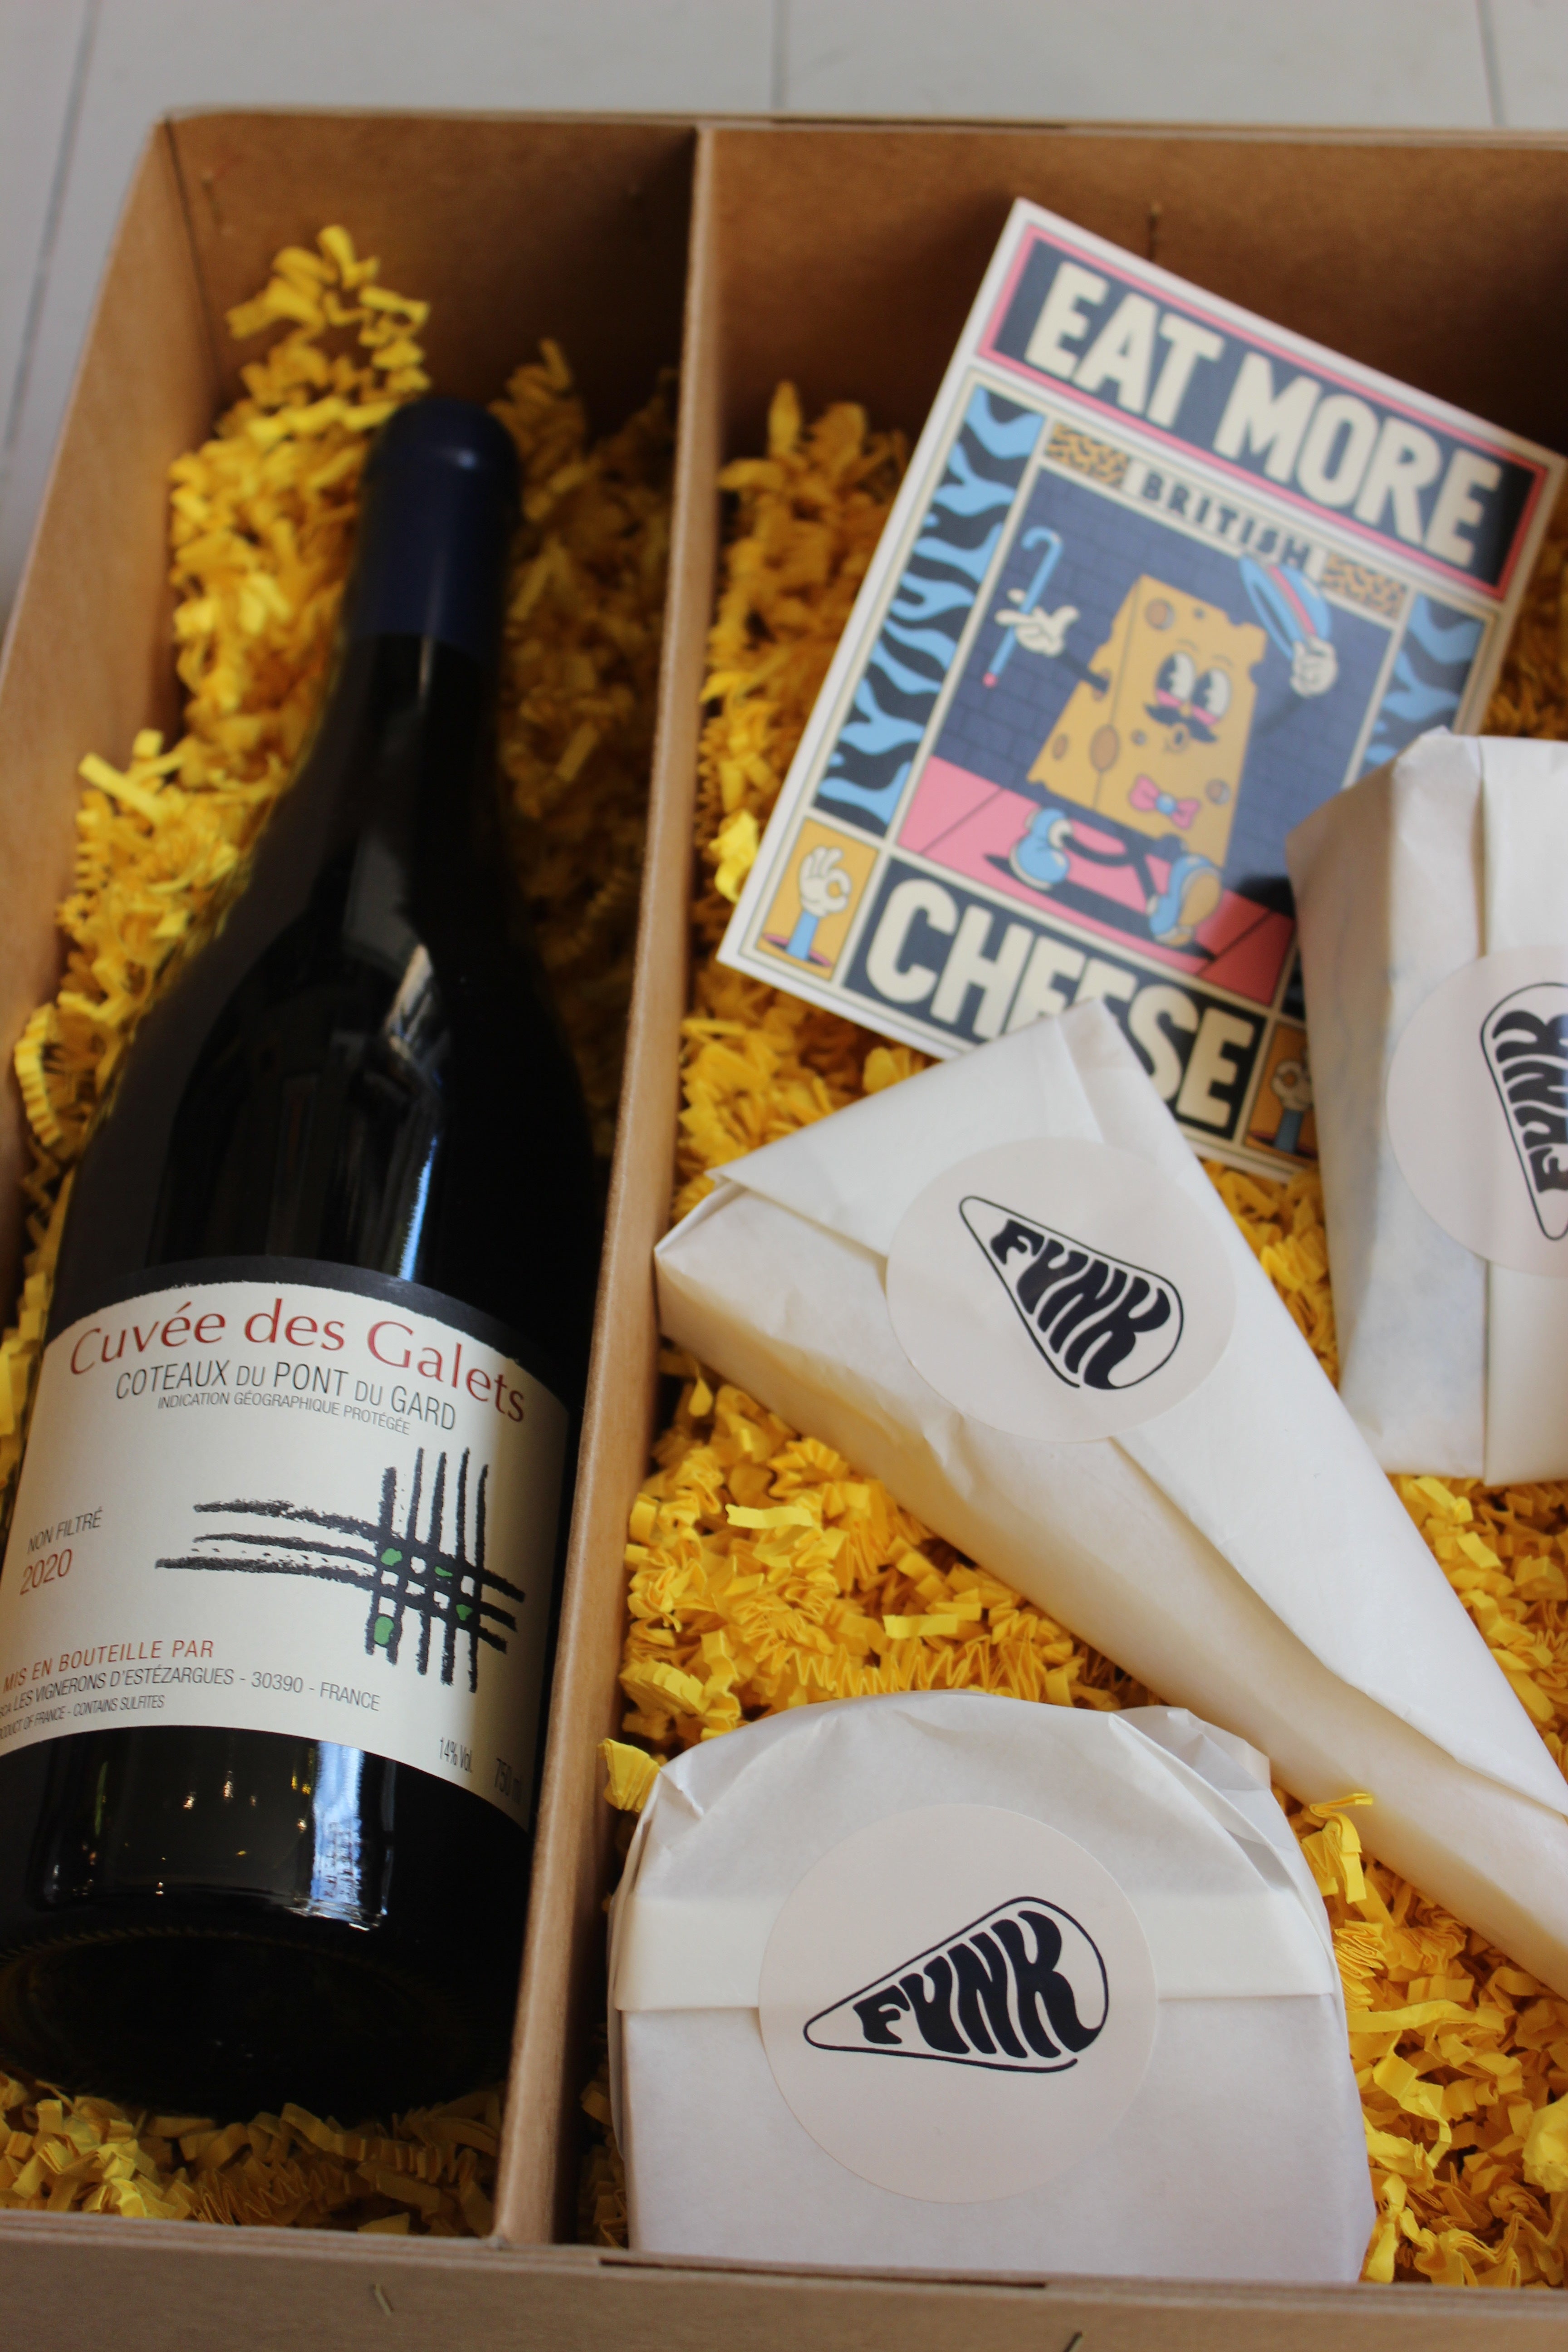 A box by Funk filled with a bottle of wine, cheeses, and a poster. 